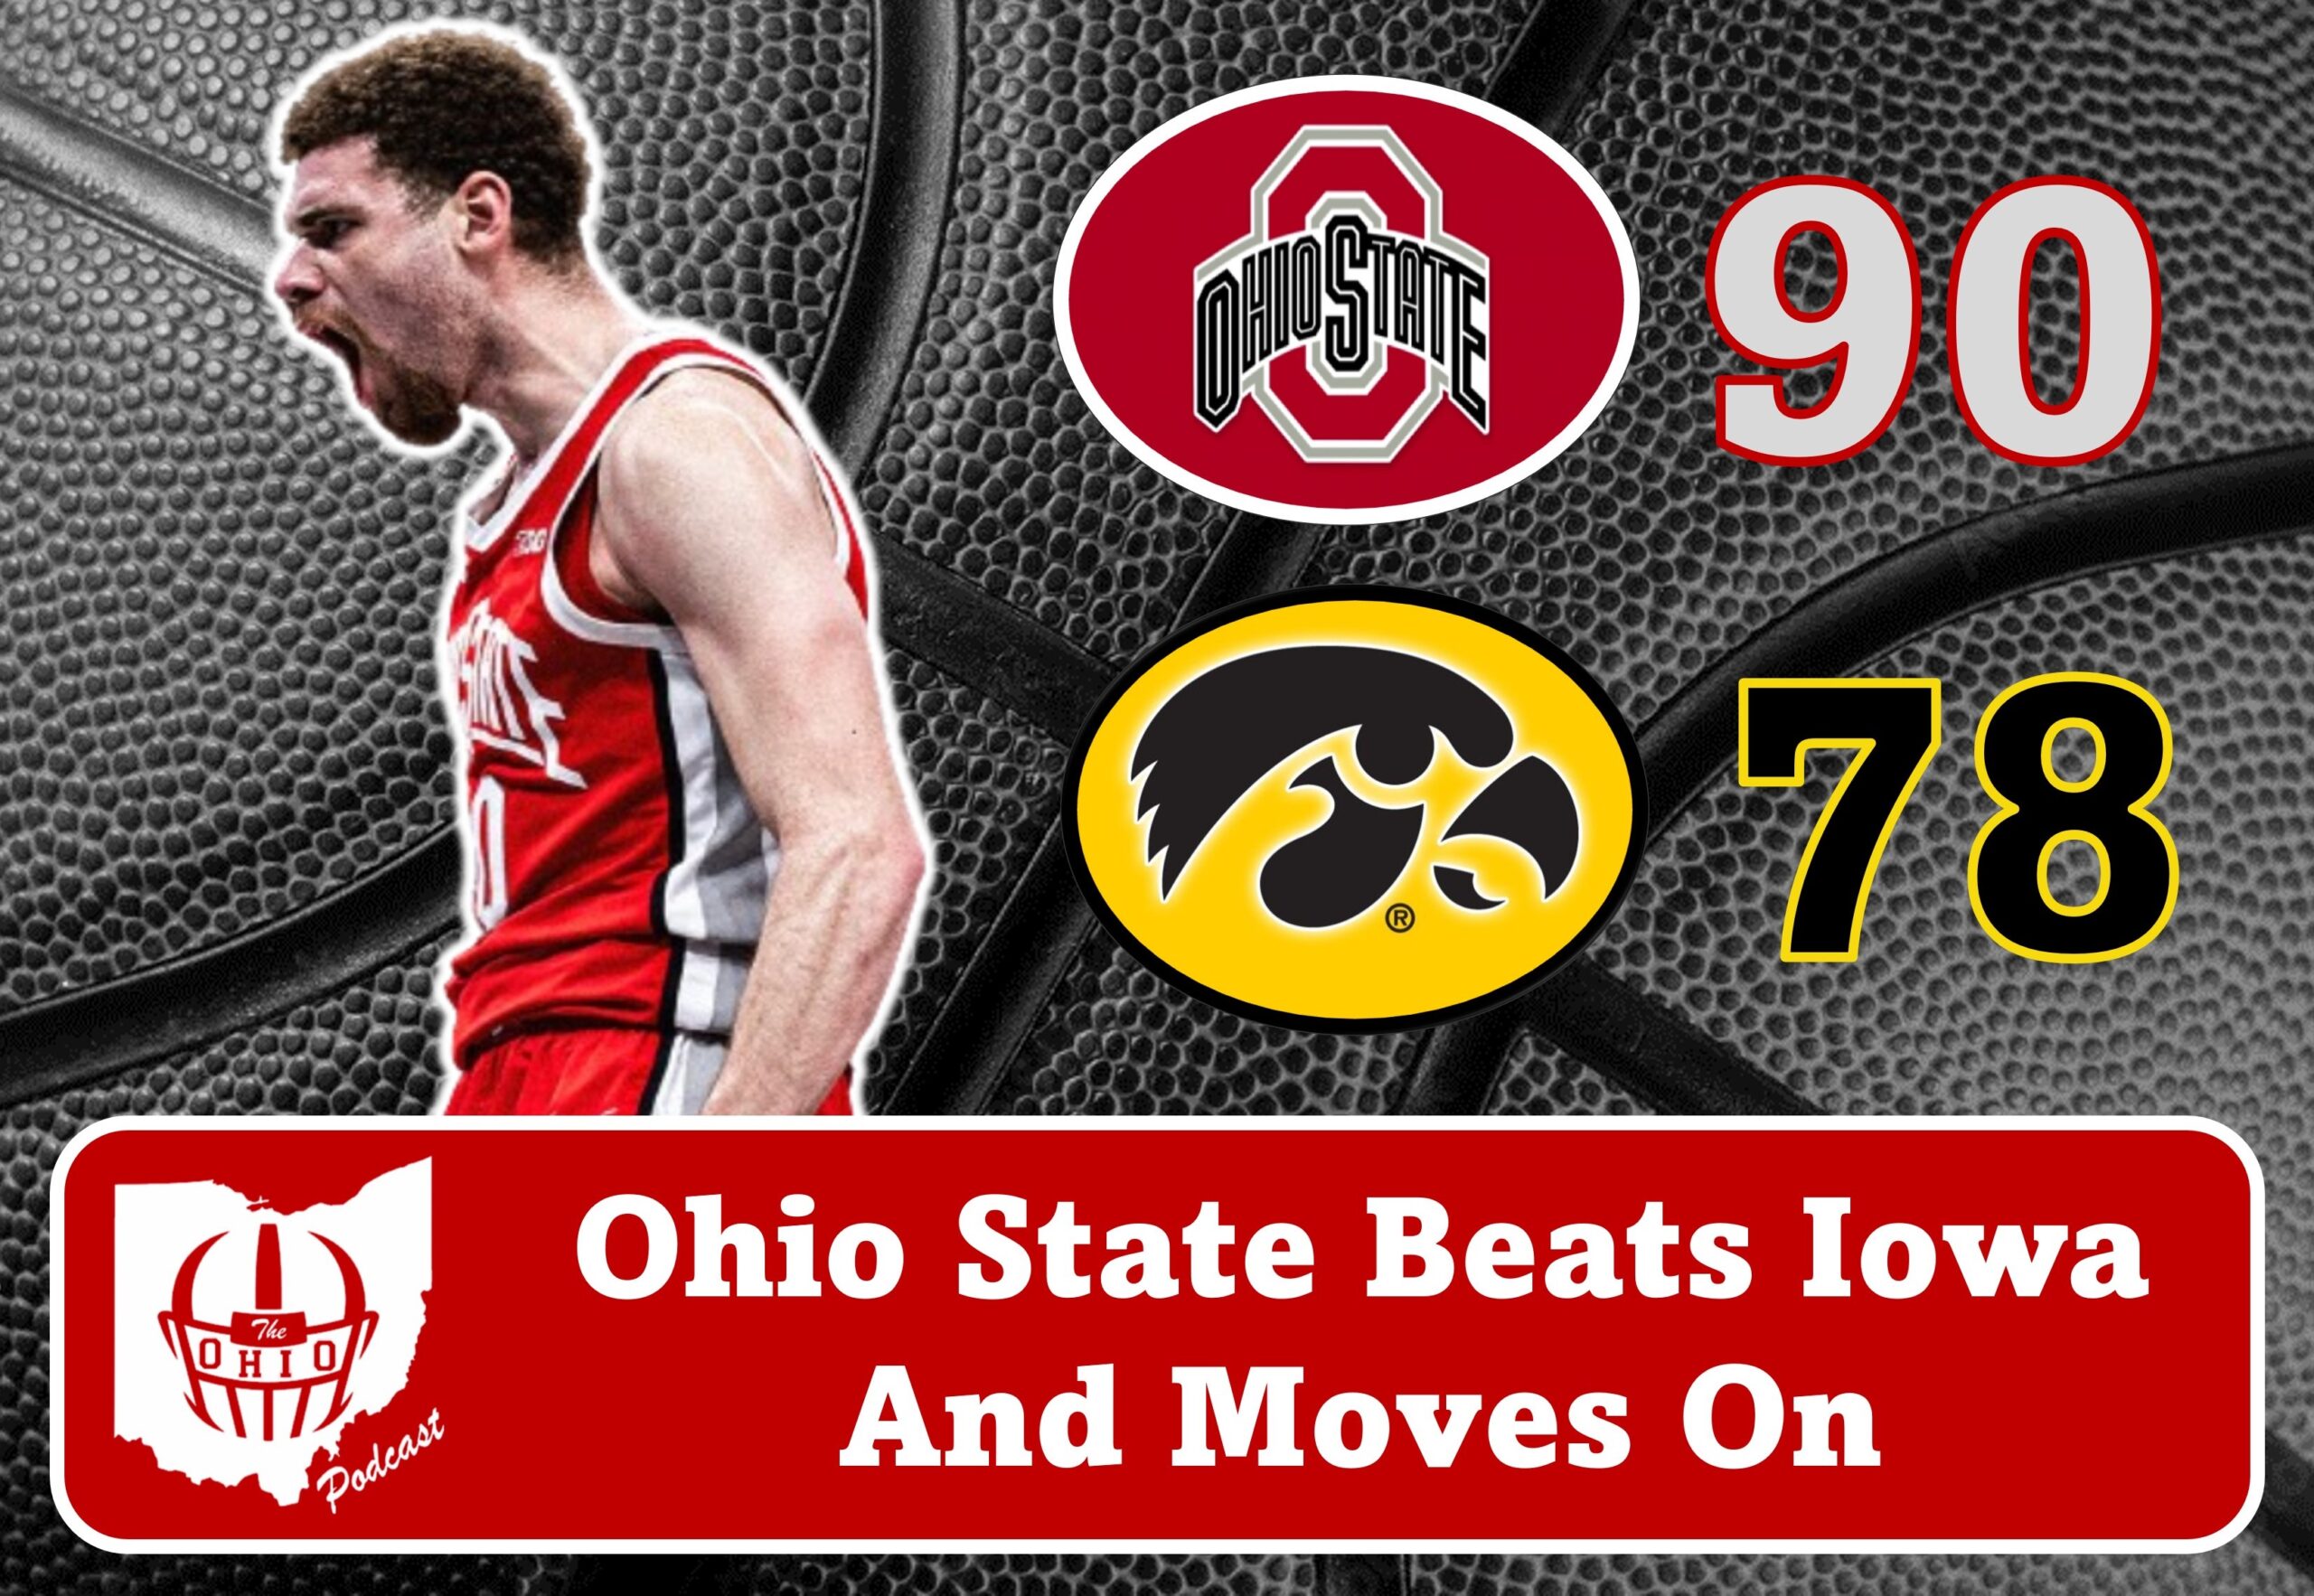 Ohio State Beats Iowa And Moves On